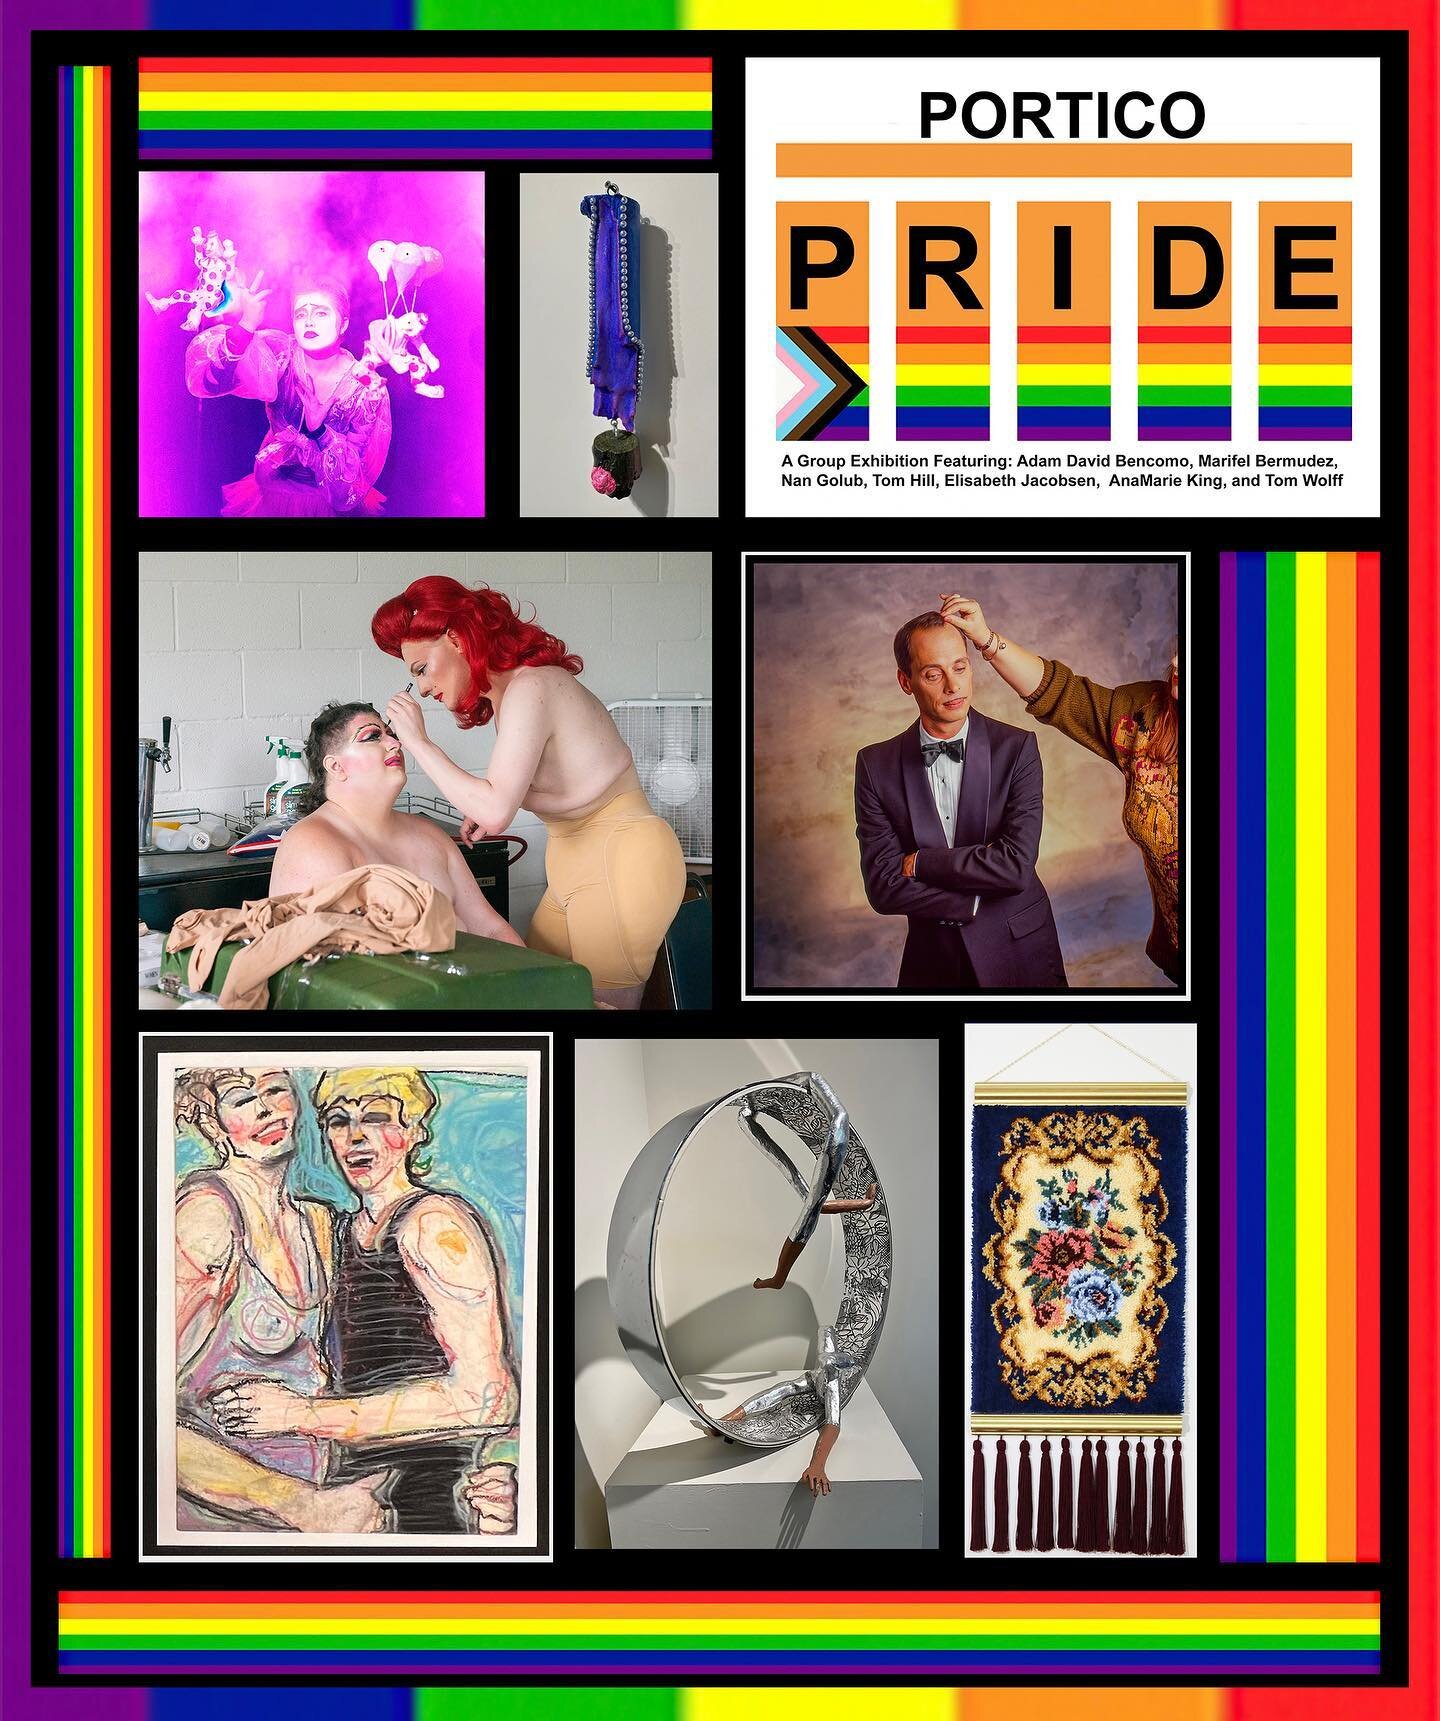 Portico Gallery kicks off PRIDE month with an exciting group exhibition featuring Adam David Bencomo, Marifel Bermudez, Nan Golub, Tom Hill, Elisabeth Jacobsen, AnaMarie King, and Tom Wolff

Portico PRIDE represents a complex community of artists rep